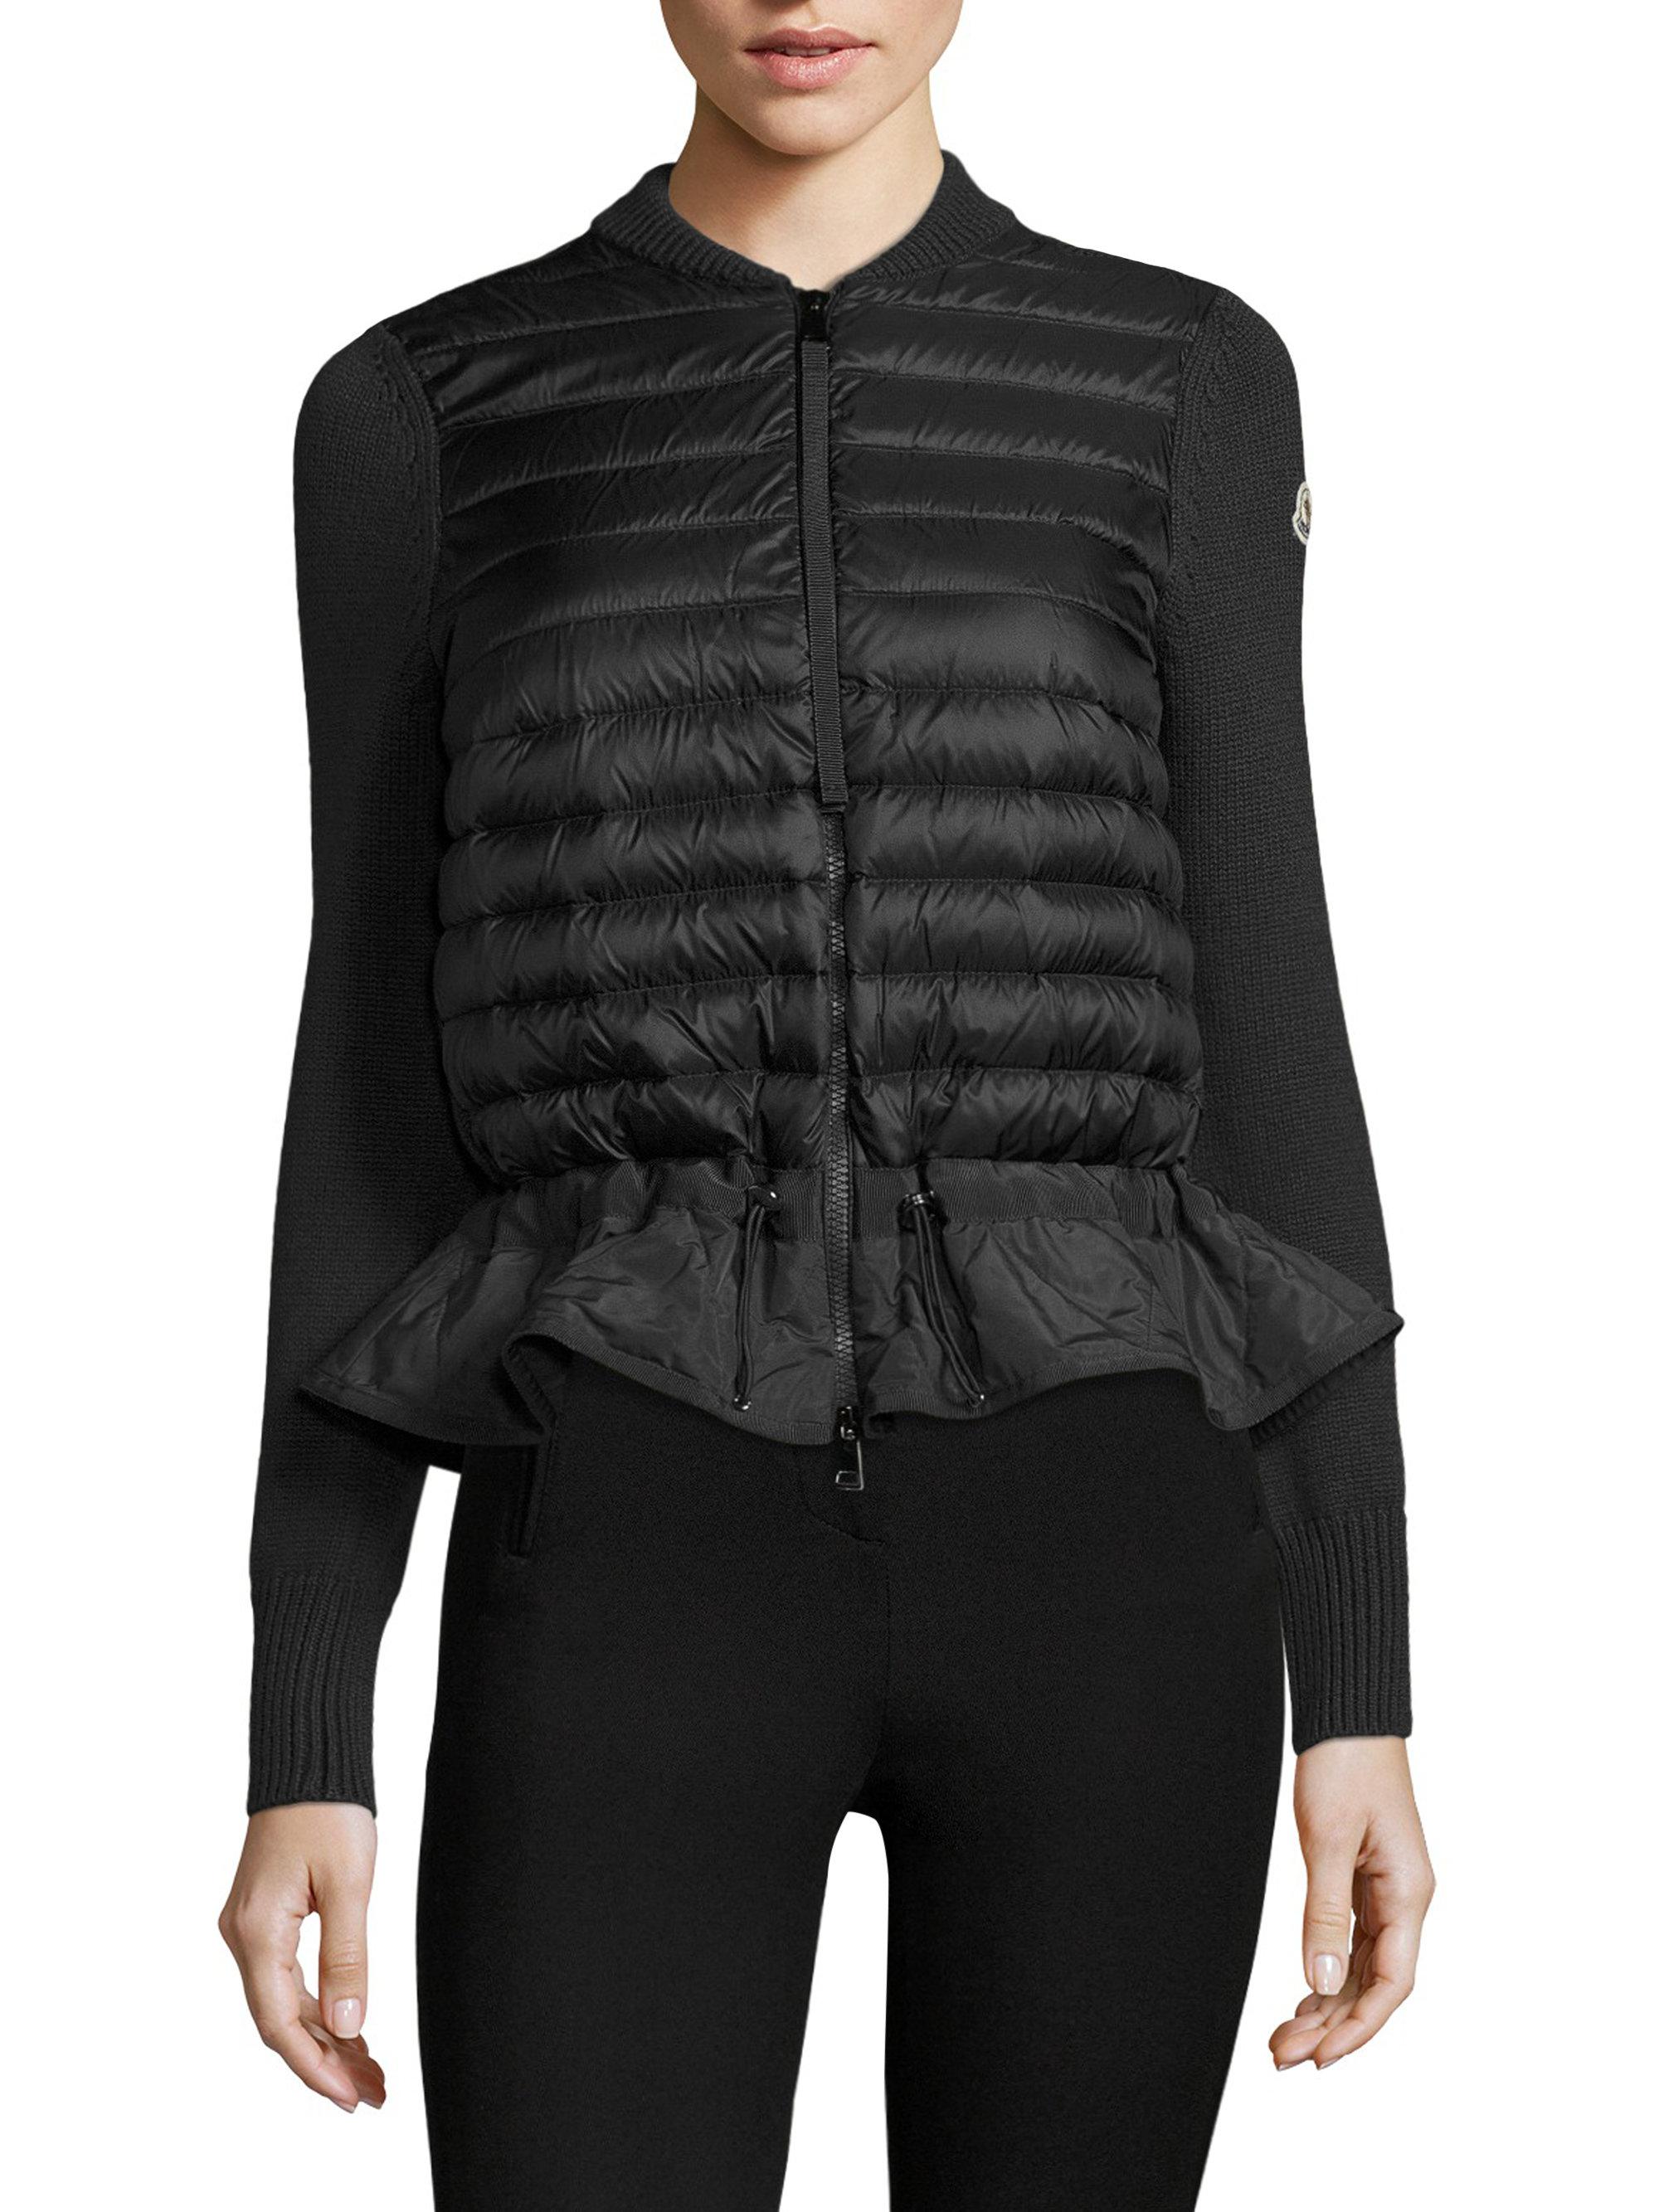 Moncler Maglione Knit Peplum Jacket in Black - Lyst